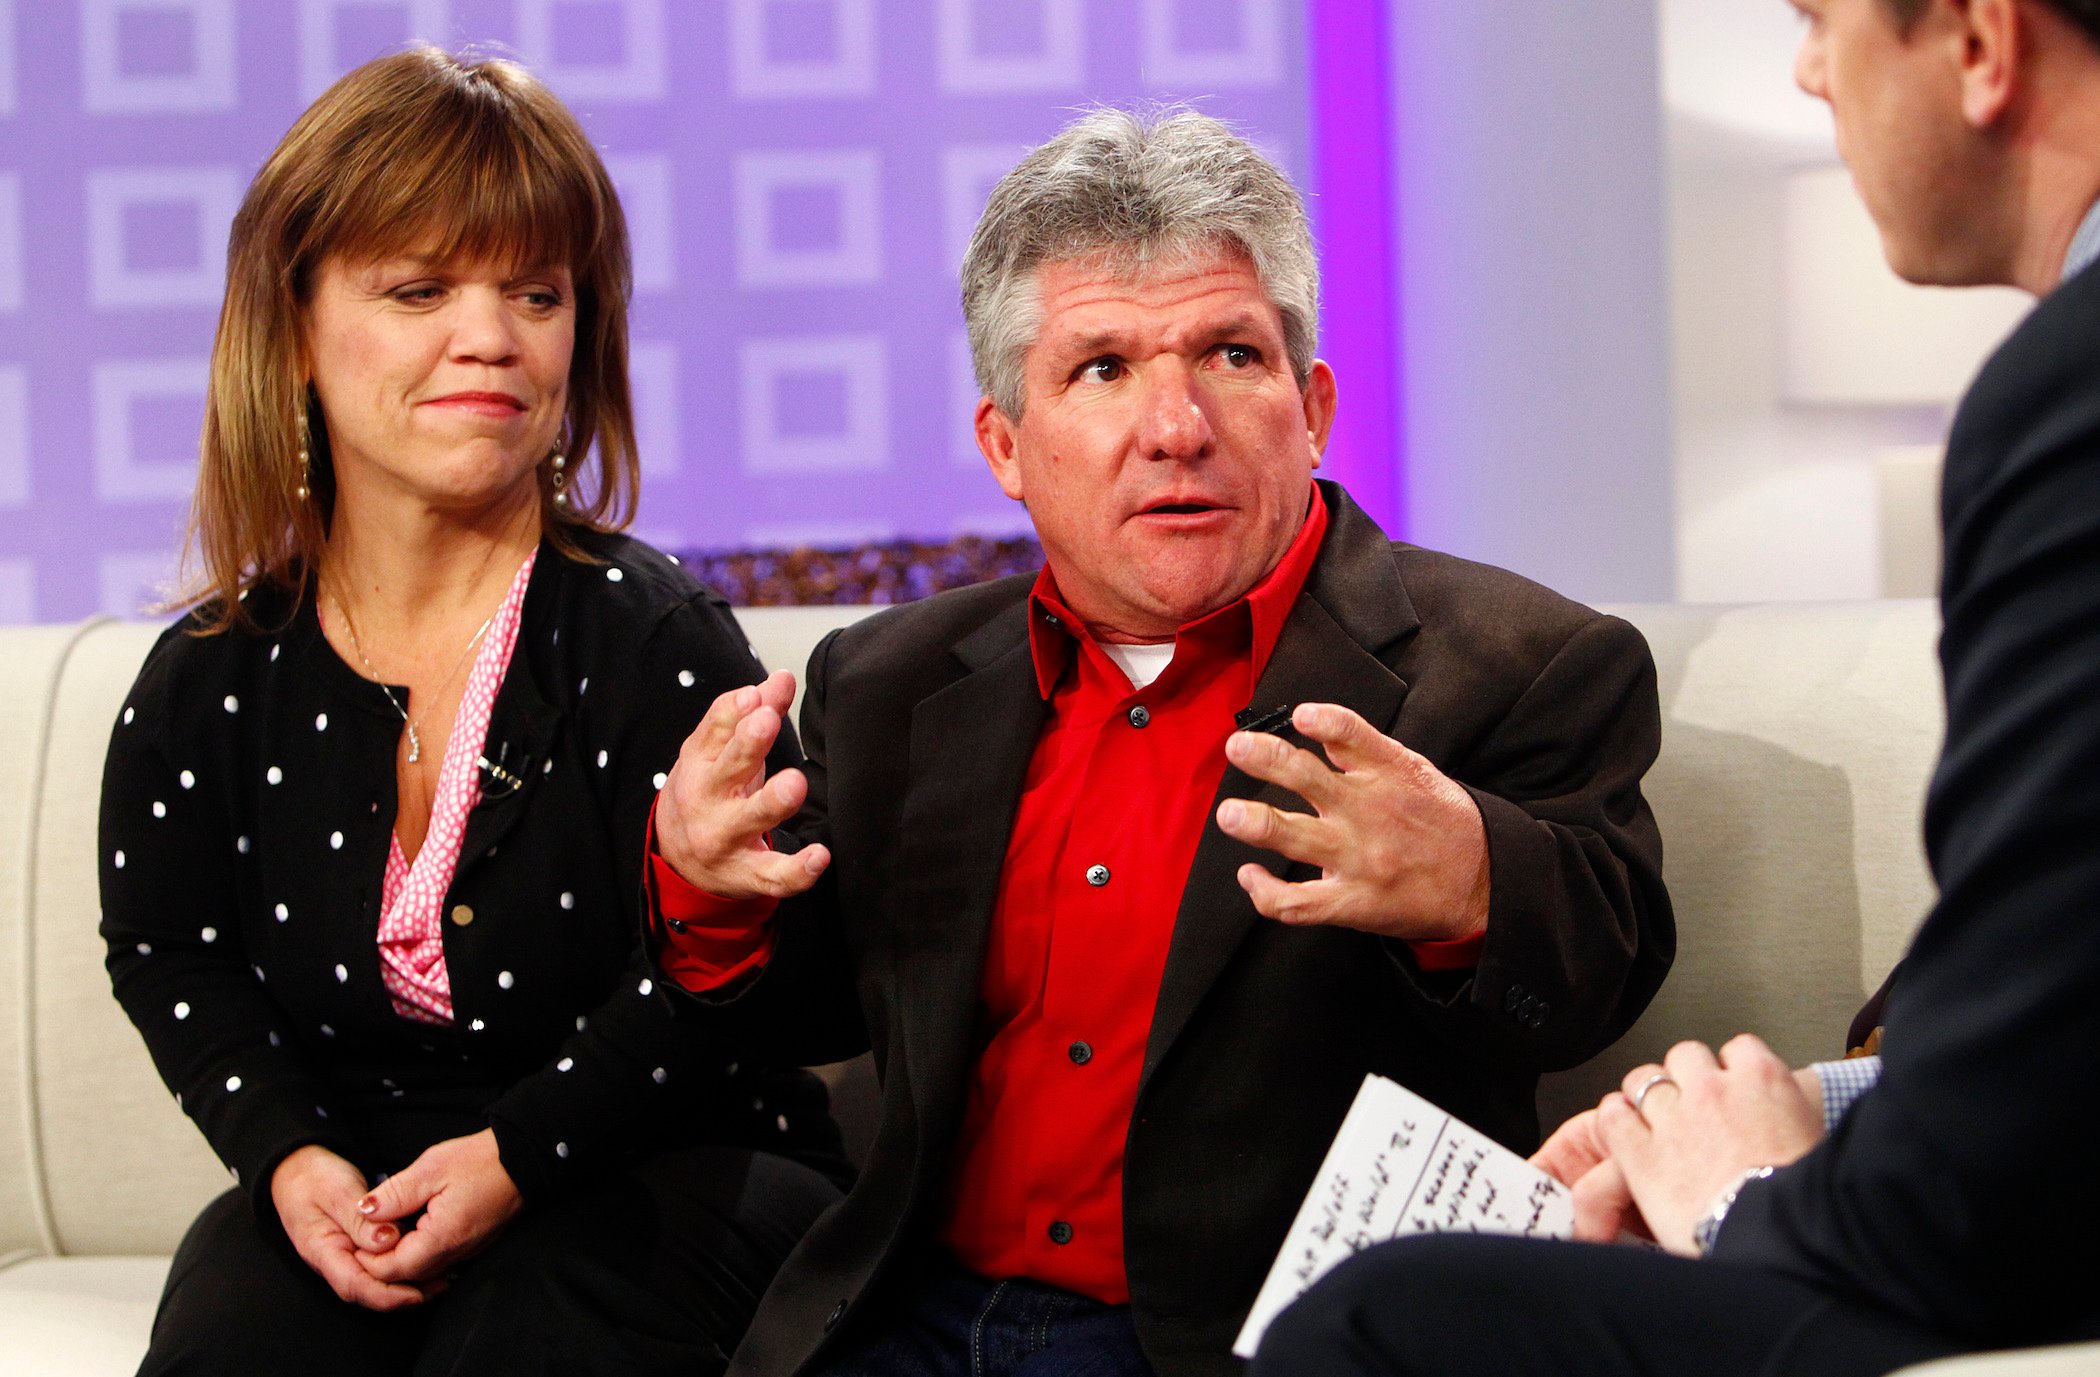 Amy Roloff and Matt Roloff from 'Little People, Big World' sitting next to each other on a couch